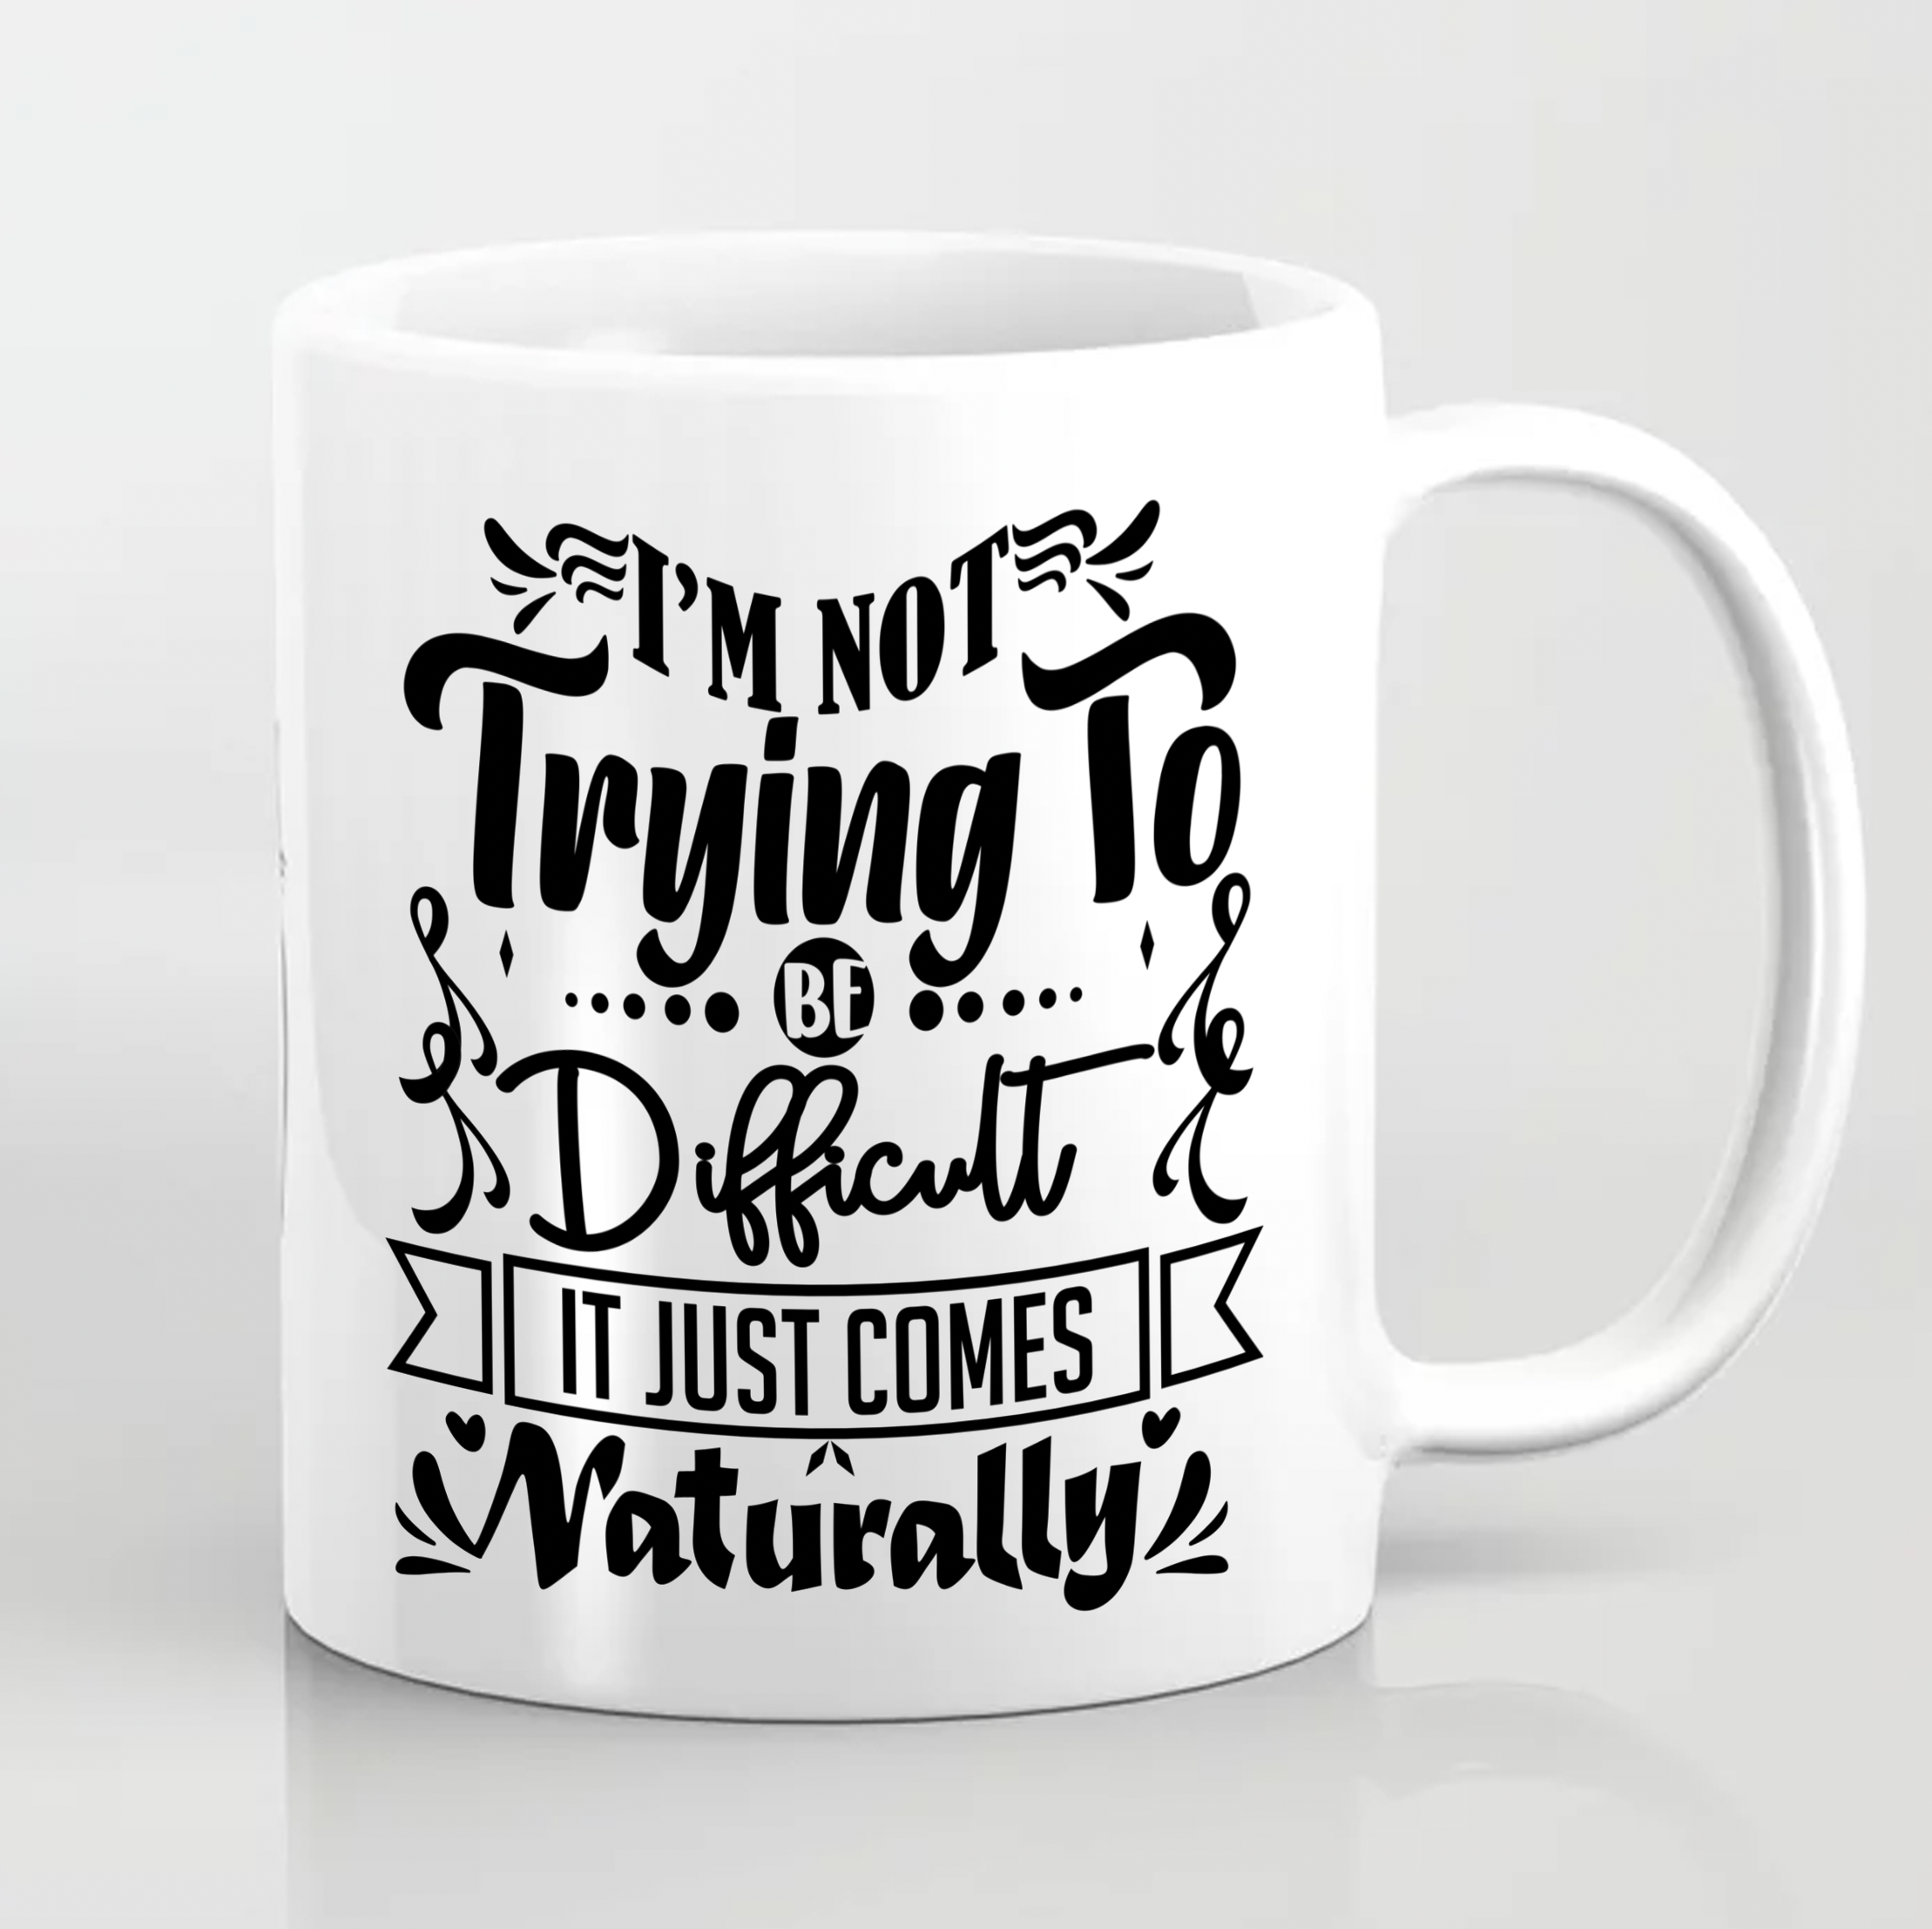 I'm Not Trying To Be Difficult It Just Comes Naturally Mug